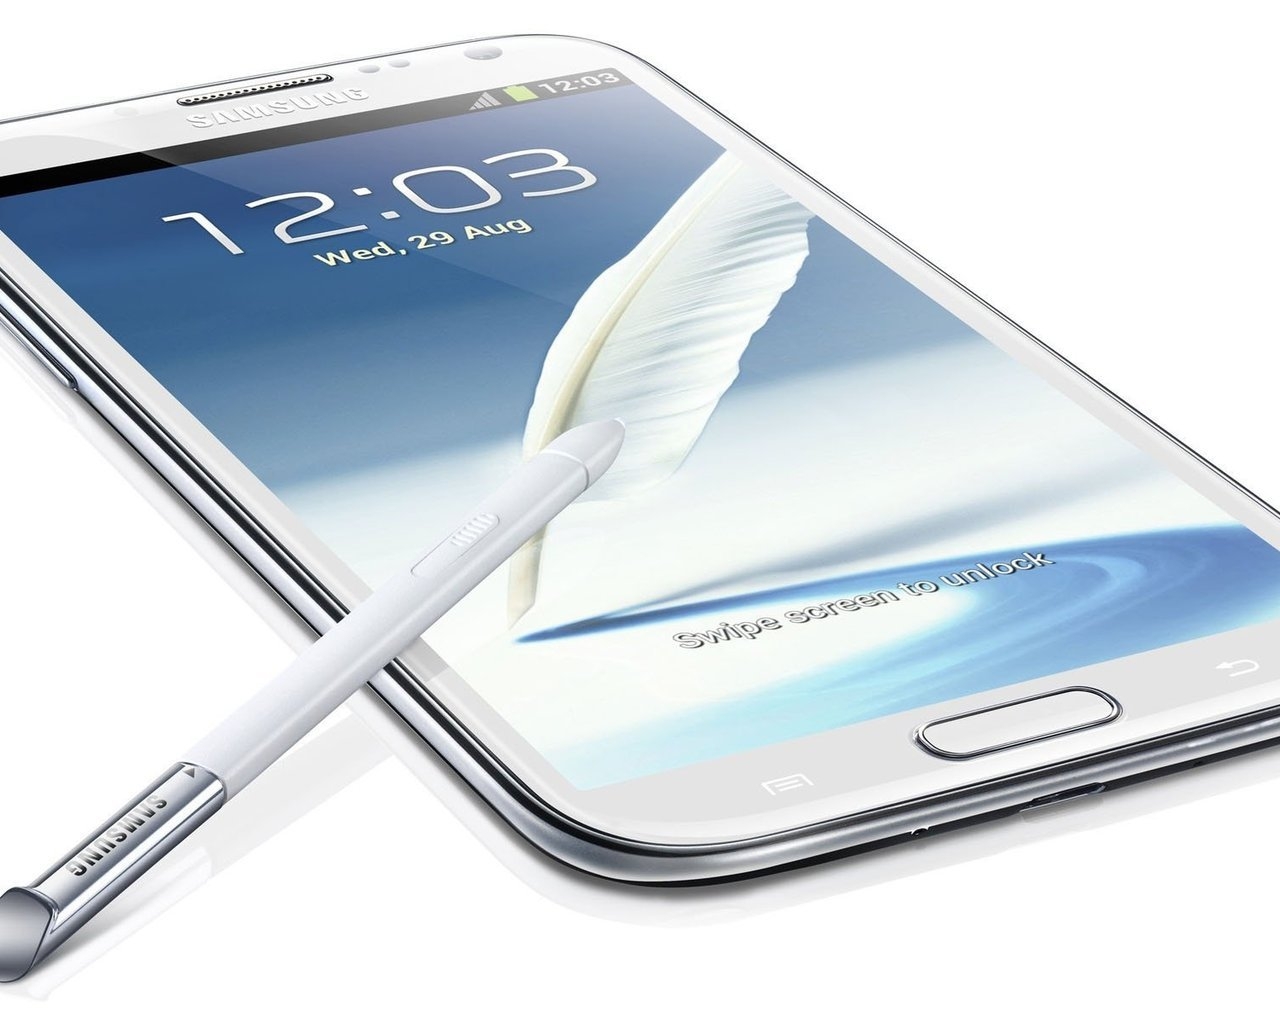 White Samsung Galaxy S3 for 1280 x 1024 resolution